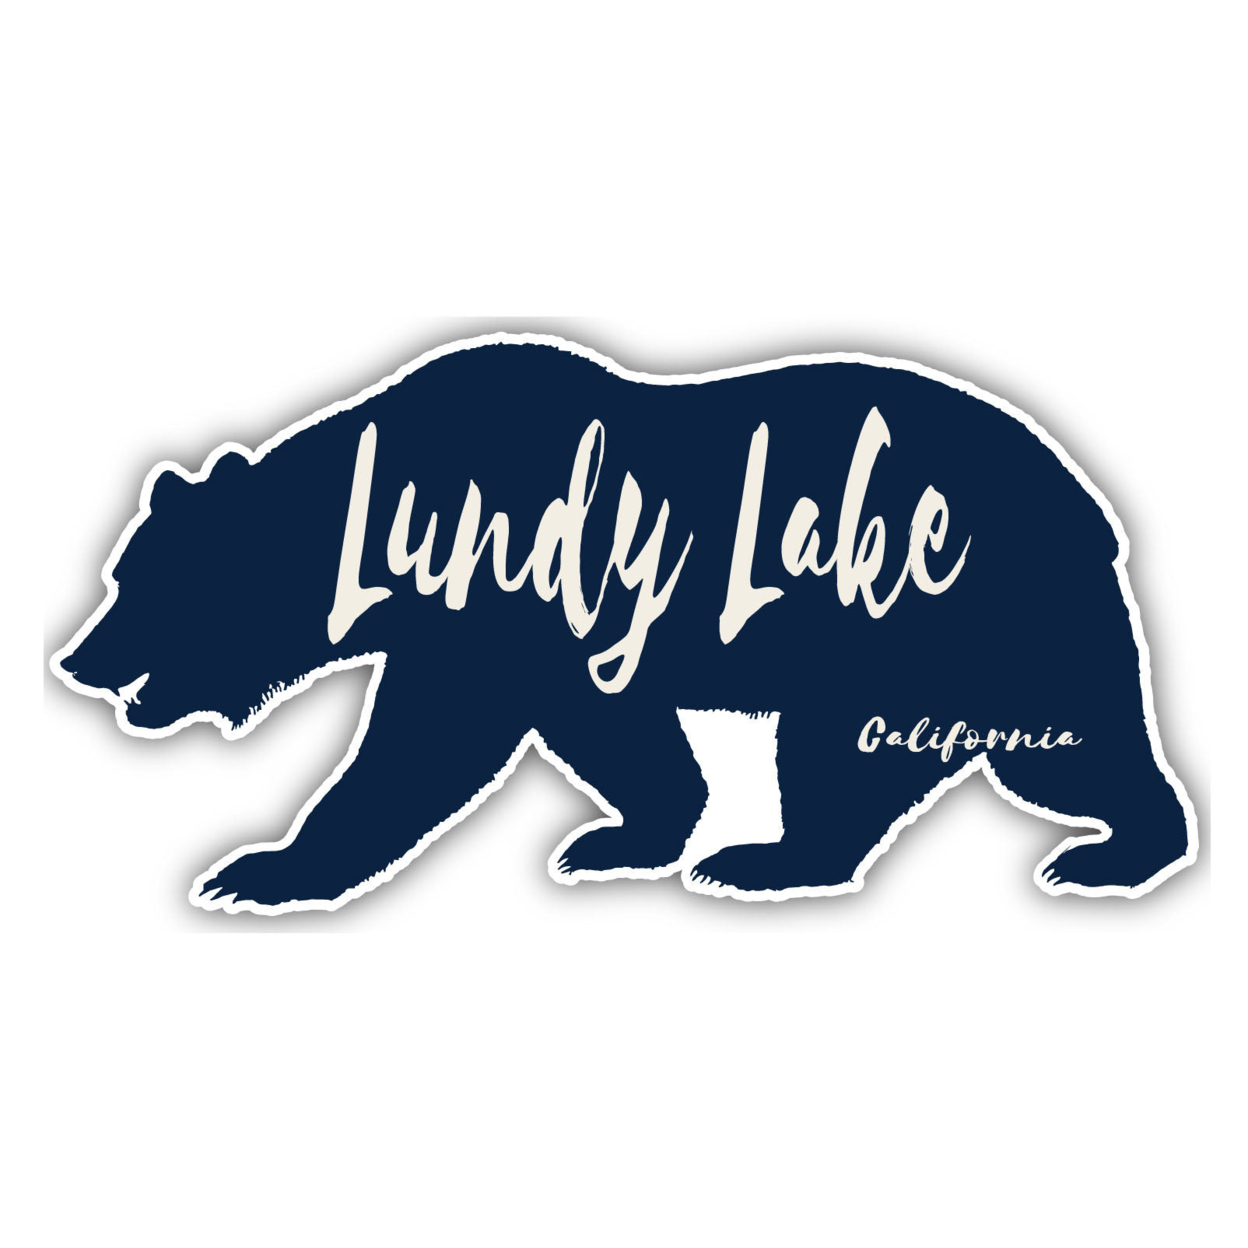 Lundy Lake California Souvenir Decorative Stickers (Choose Theme And Size) - 2-Inch, Tent